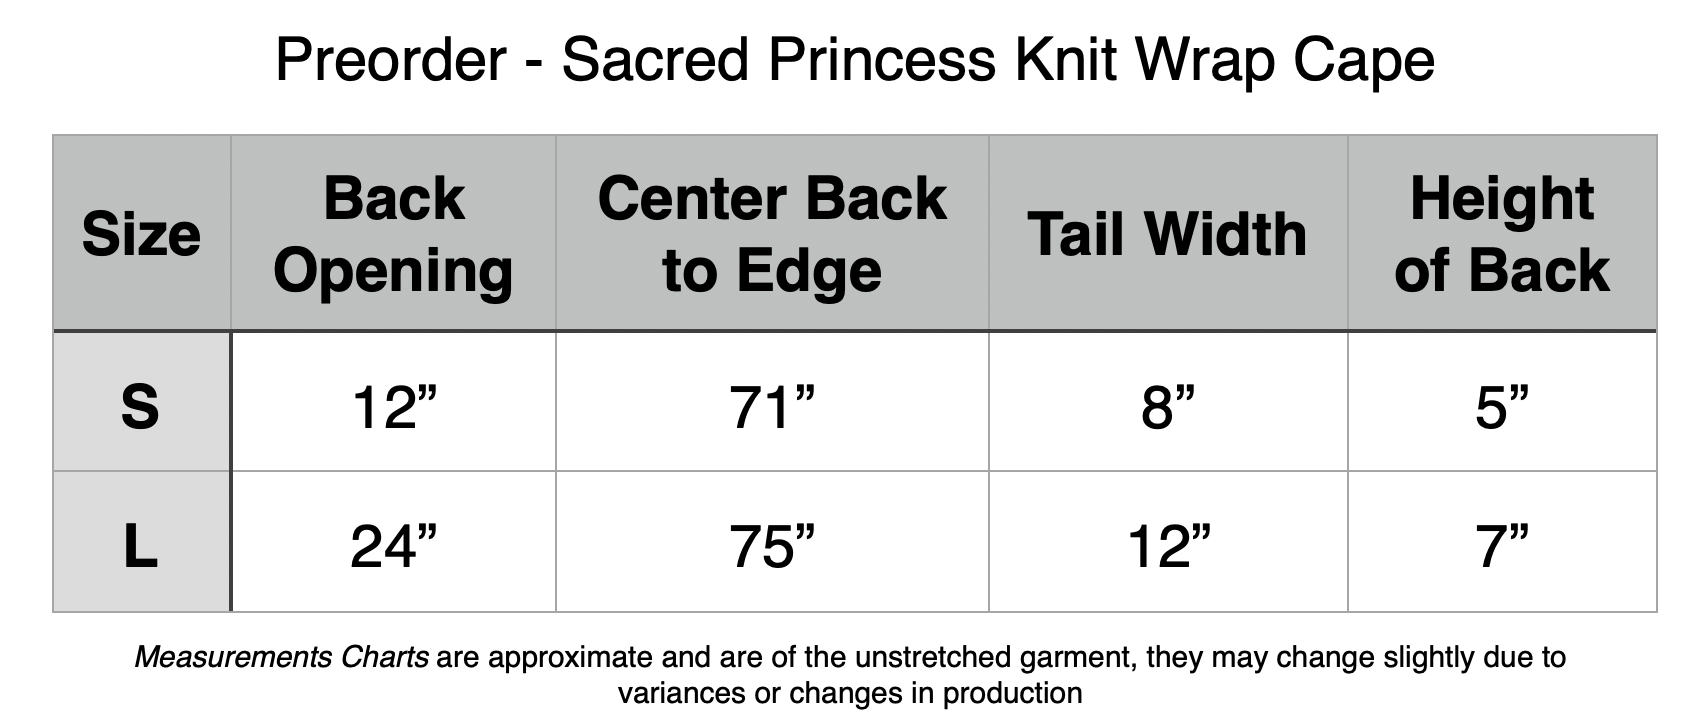 PREORDER: Sacred Princess Knit Wrap Cape - Cursed Lake Blue. Small: 12” Back Opening, 71” Center Back to Edge, 8” Tail Width, 5” Back Height. Large: 24” Back Opening, 75” Center Back to Edge, 12” Tail Width, 7” Back Height.